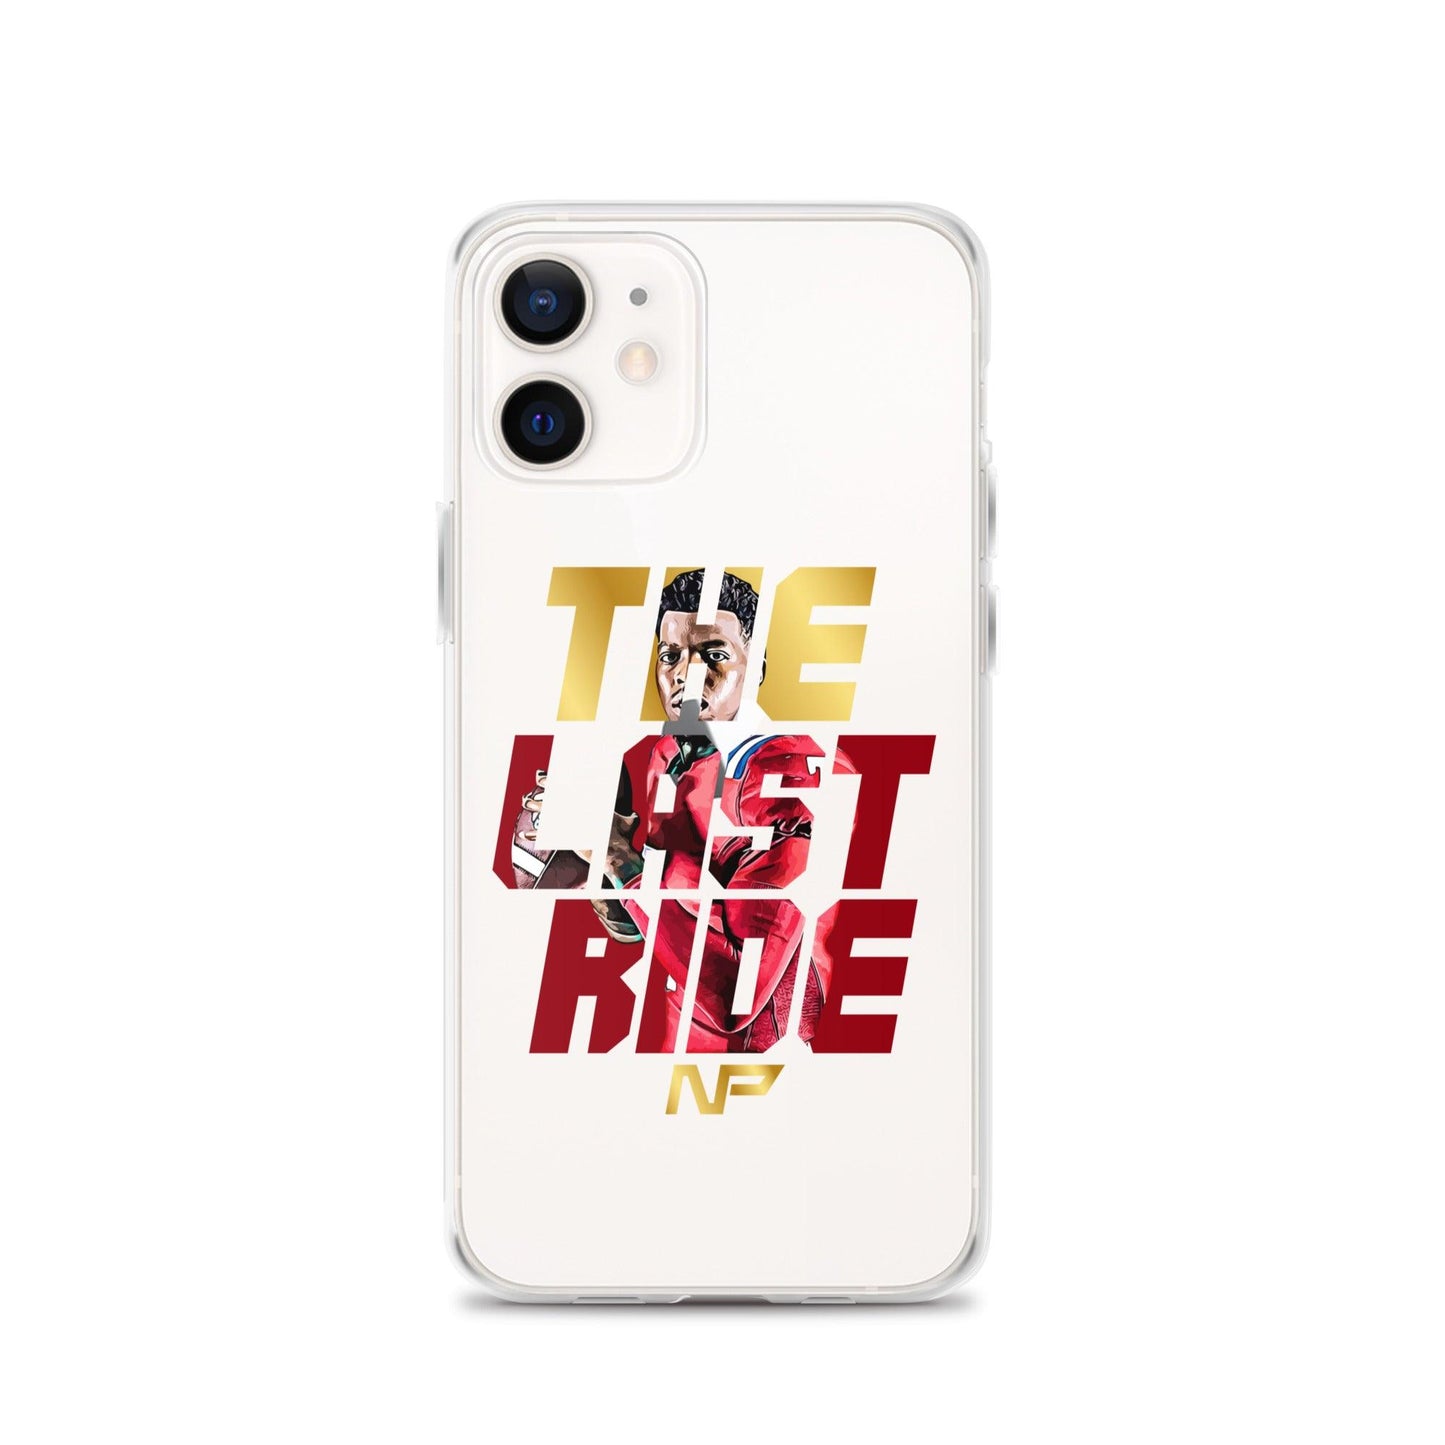 N'Kosi Perry "Last Ride" iPhone Case - Fan Arch